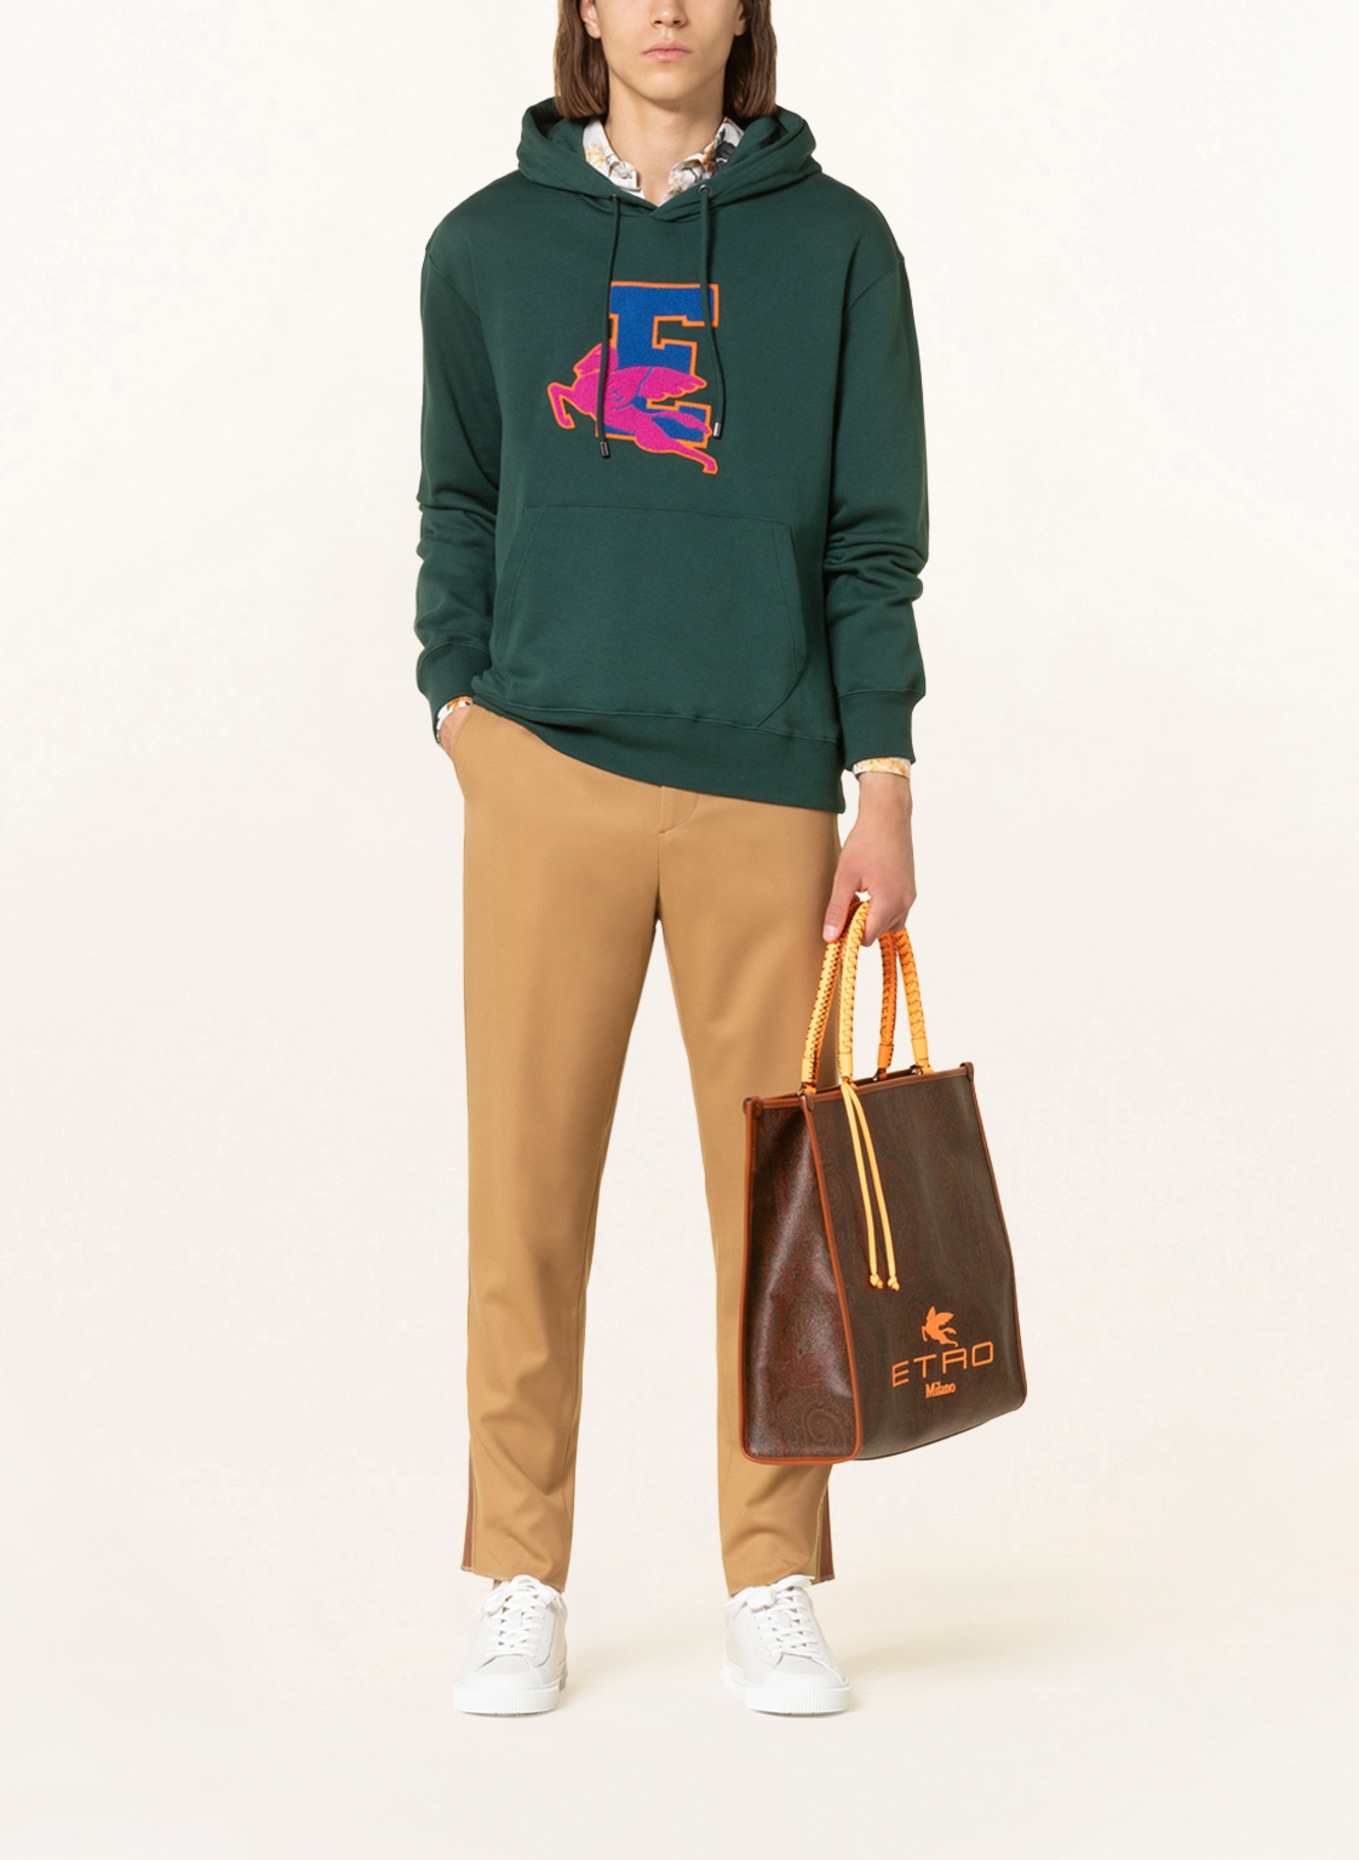 ETRO Pants in jogger style extra slim fit , Color: CAMEL (Image 2)